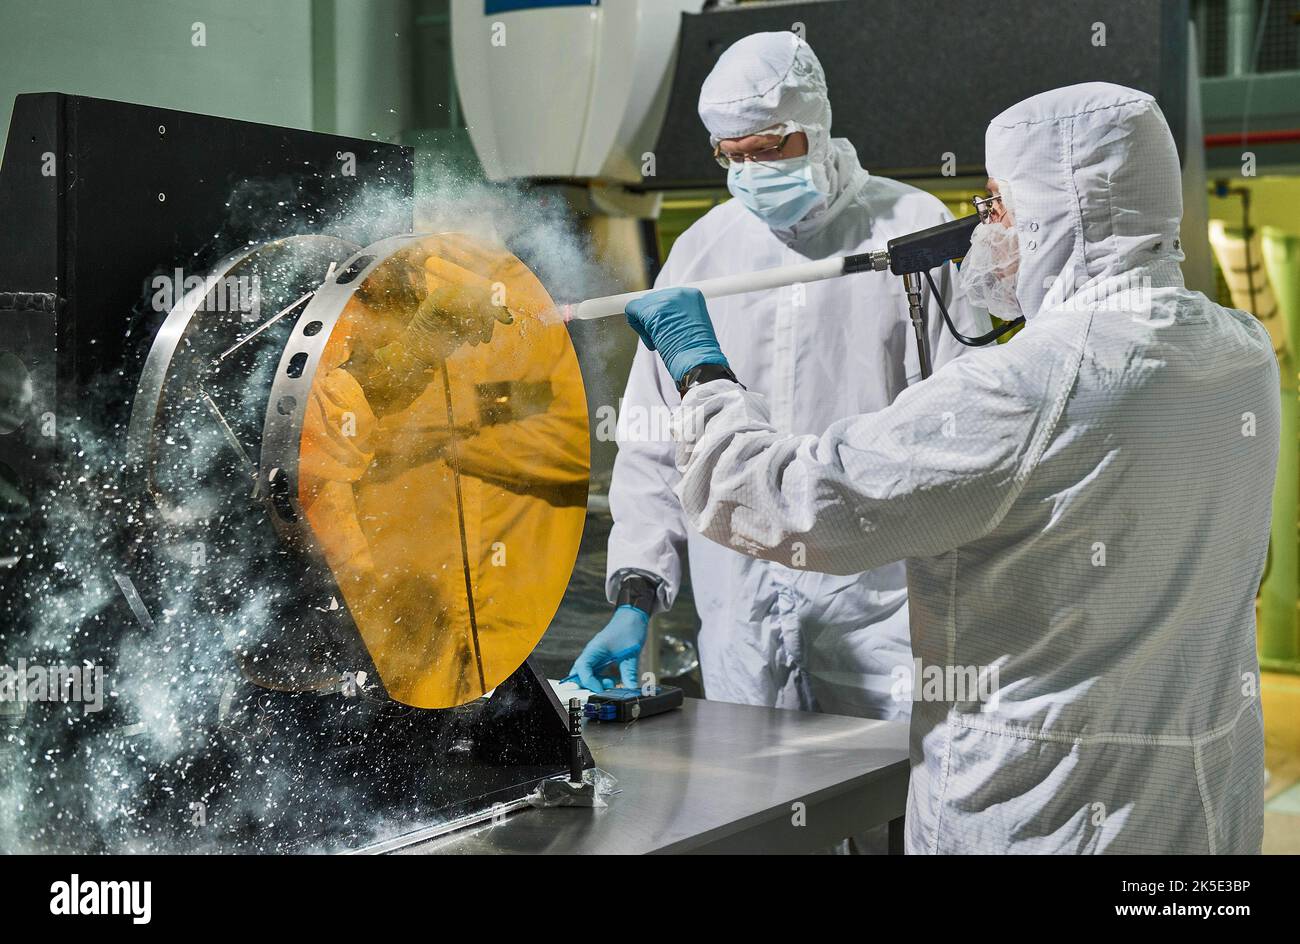 Preparing the James Webb Space Telescope (JWST). Engineers clean test mirror with carbon dioxide snow By shooting carbon dioxide snow at the surface, engineers are able to clean large telescope mirrors without scratching them.'The snow-like crystals knock contaminate particulates and molecules off the mirror. Webb will be capturing light from 13.5 billion light years away. To do this, its mirror must be kept super clean. An optimised version of a NASA image by experienced lead photographer Chris Gunn. Credit: NASA/Chris Gunn. For editorial use only. Stock Photo